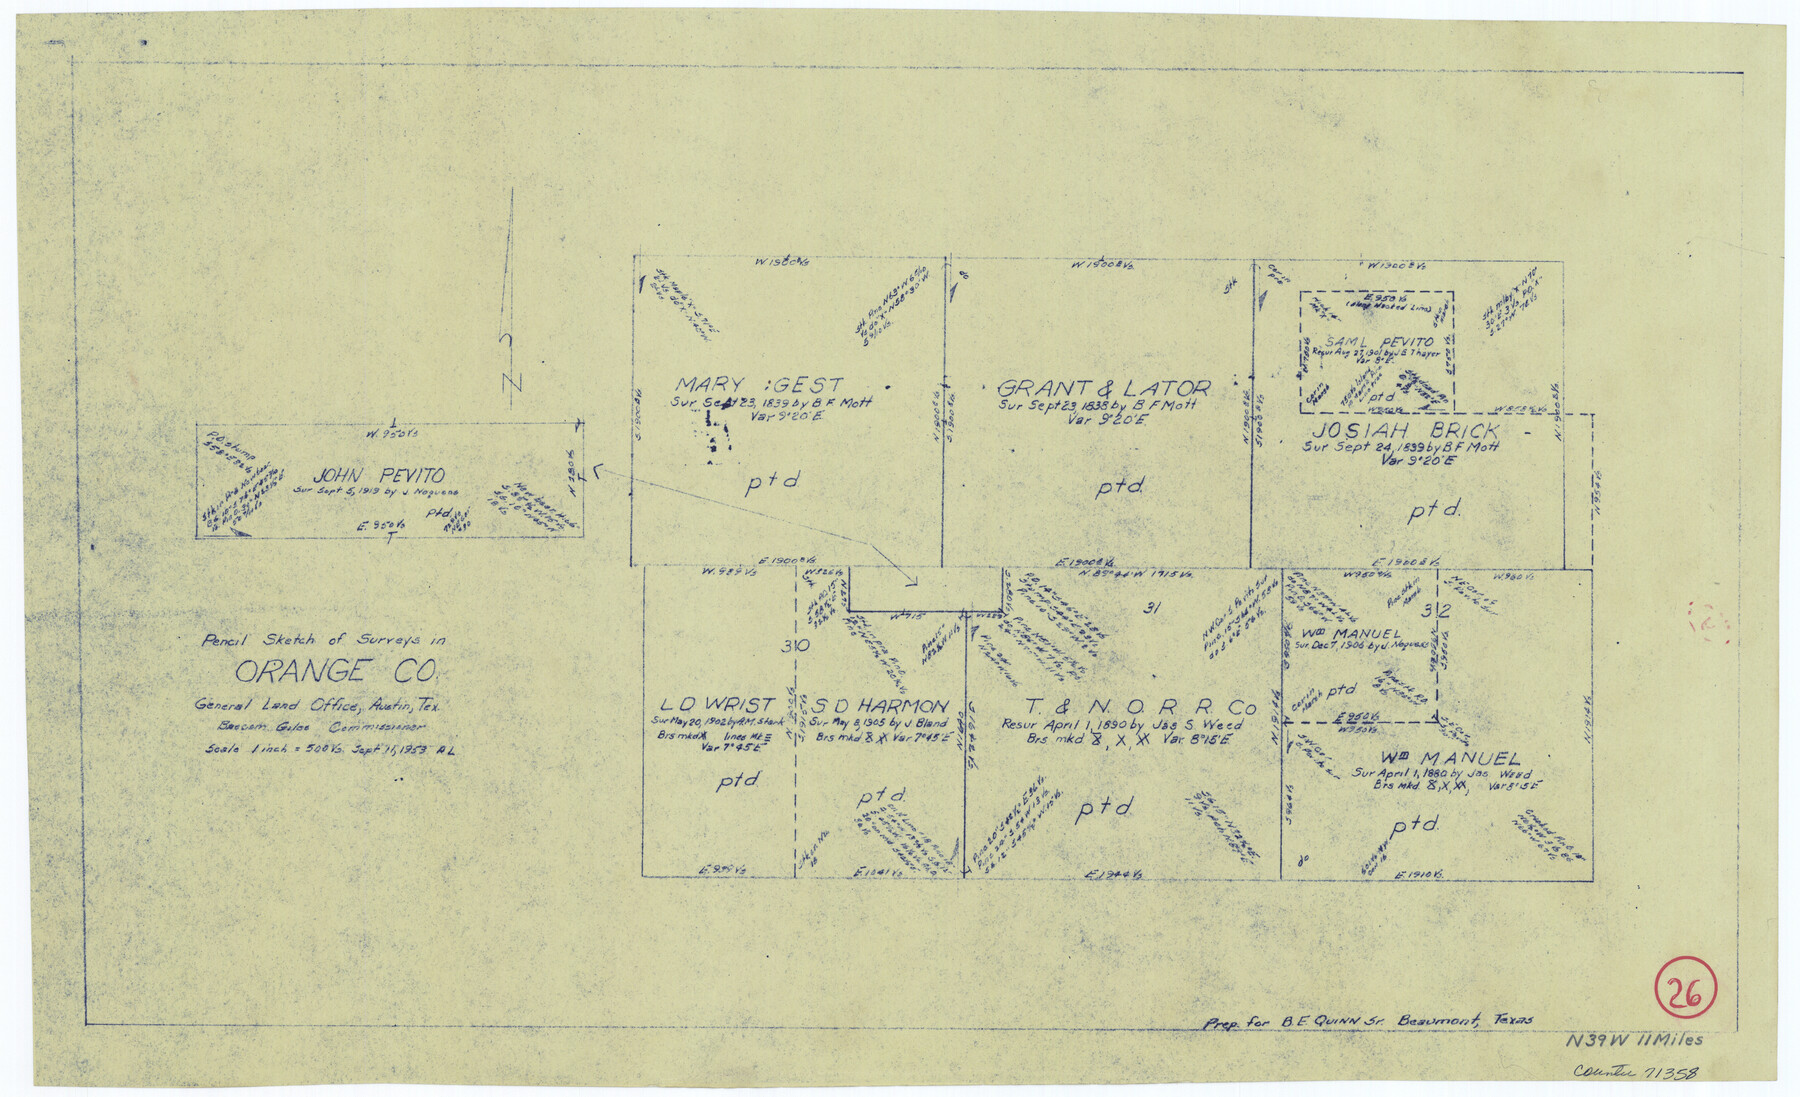 71358, Orange County Working Sketch 26, General Map Collection